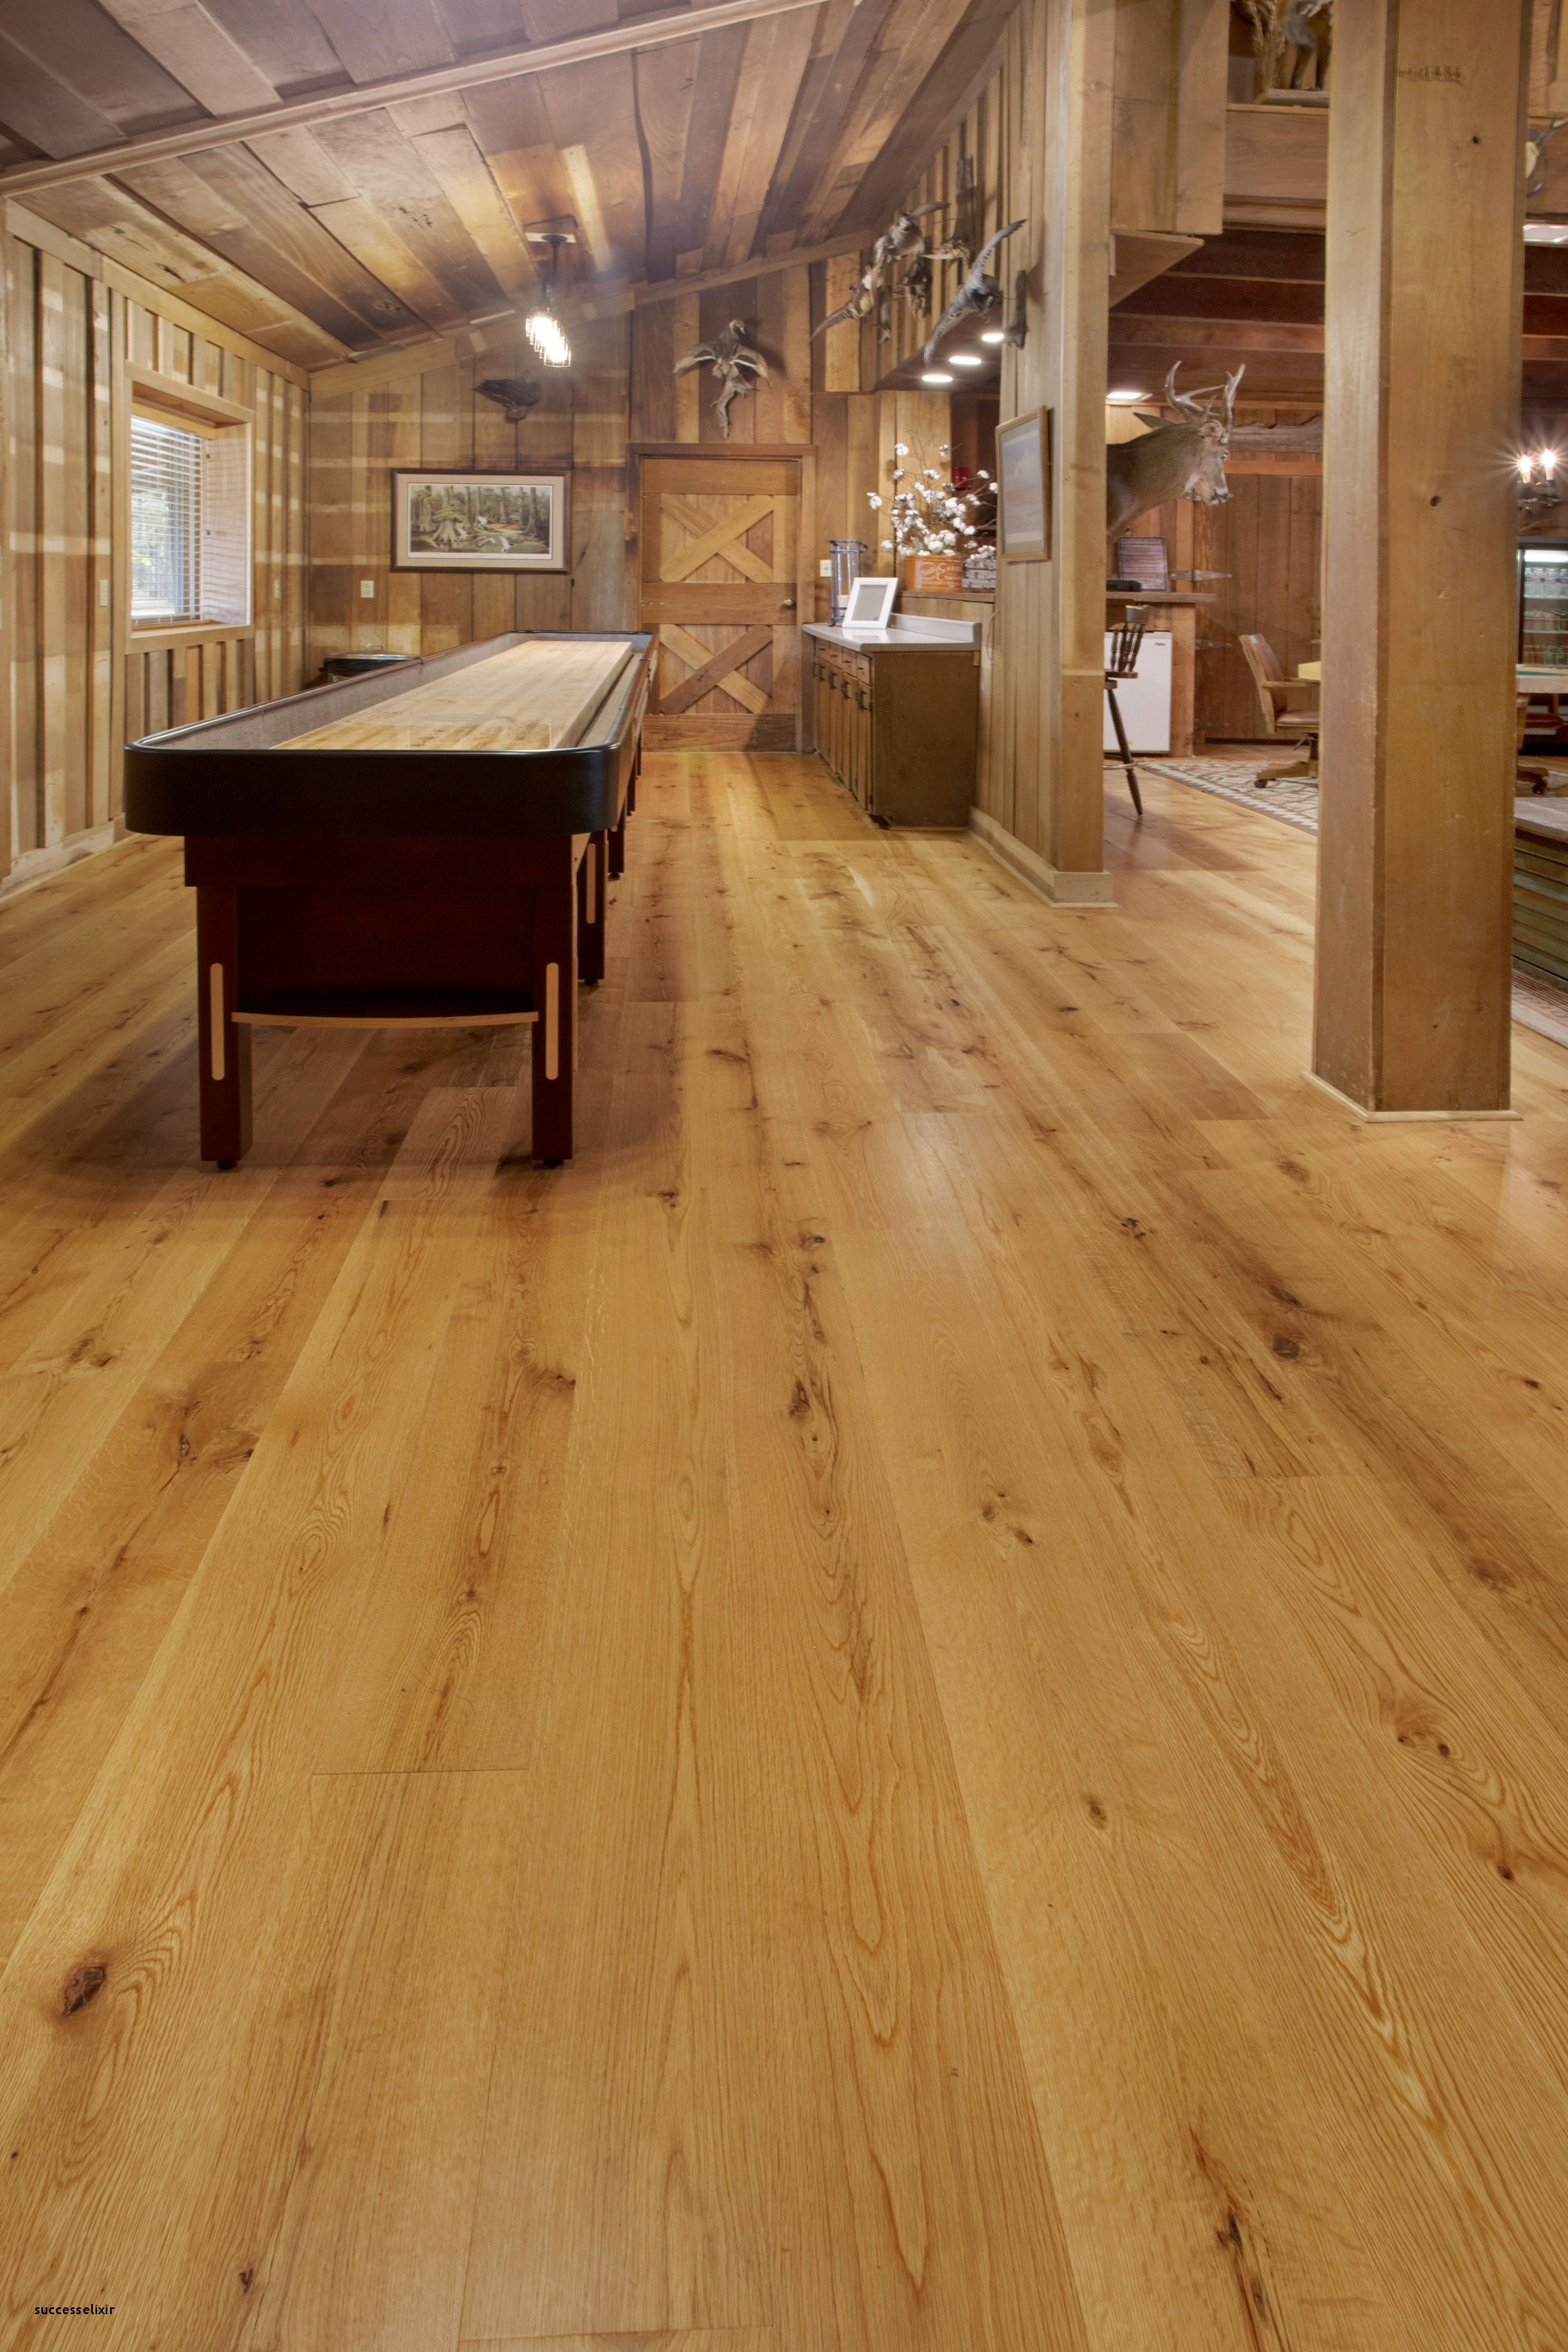 12 Wonderful Stained Hardwood Floors Pictures 2023 free download stained hardwood floors pictures of 23 fancy unfinished wood flooring image in 5 8 unfinished engineered legacy live by maxwell hardwood flooring natural finish